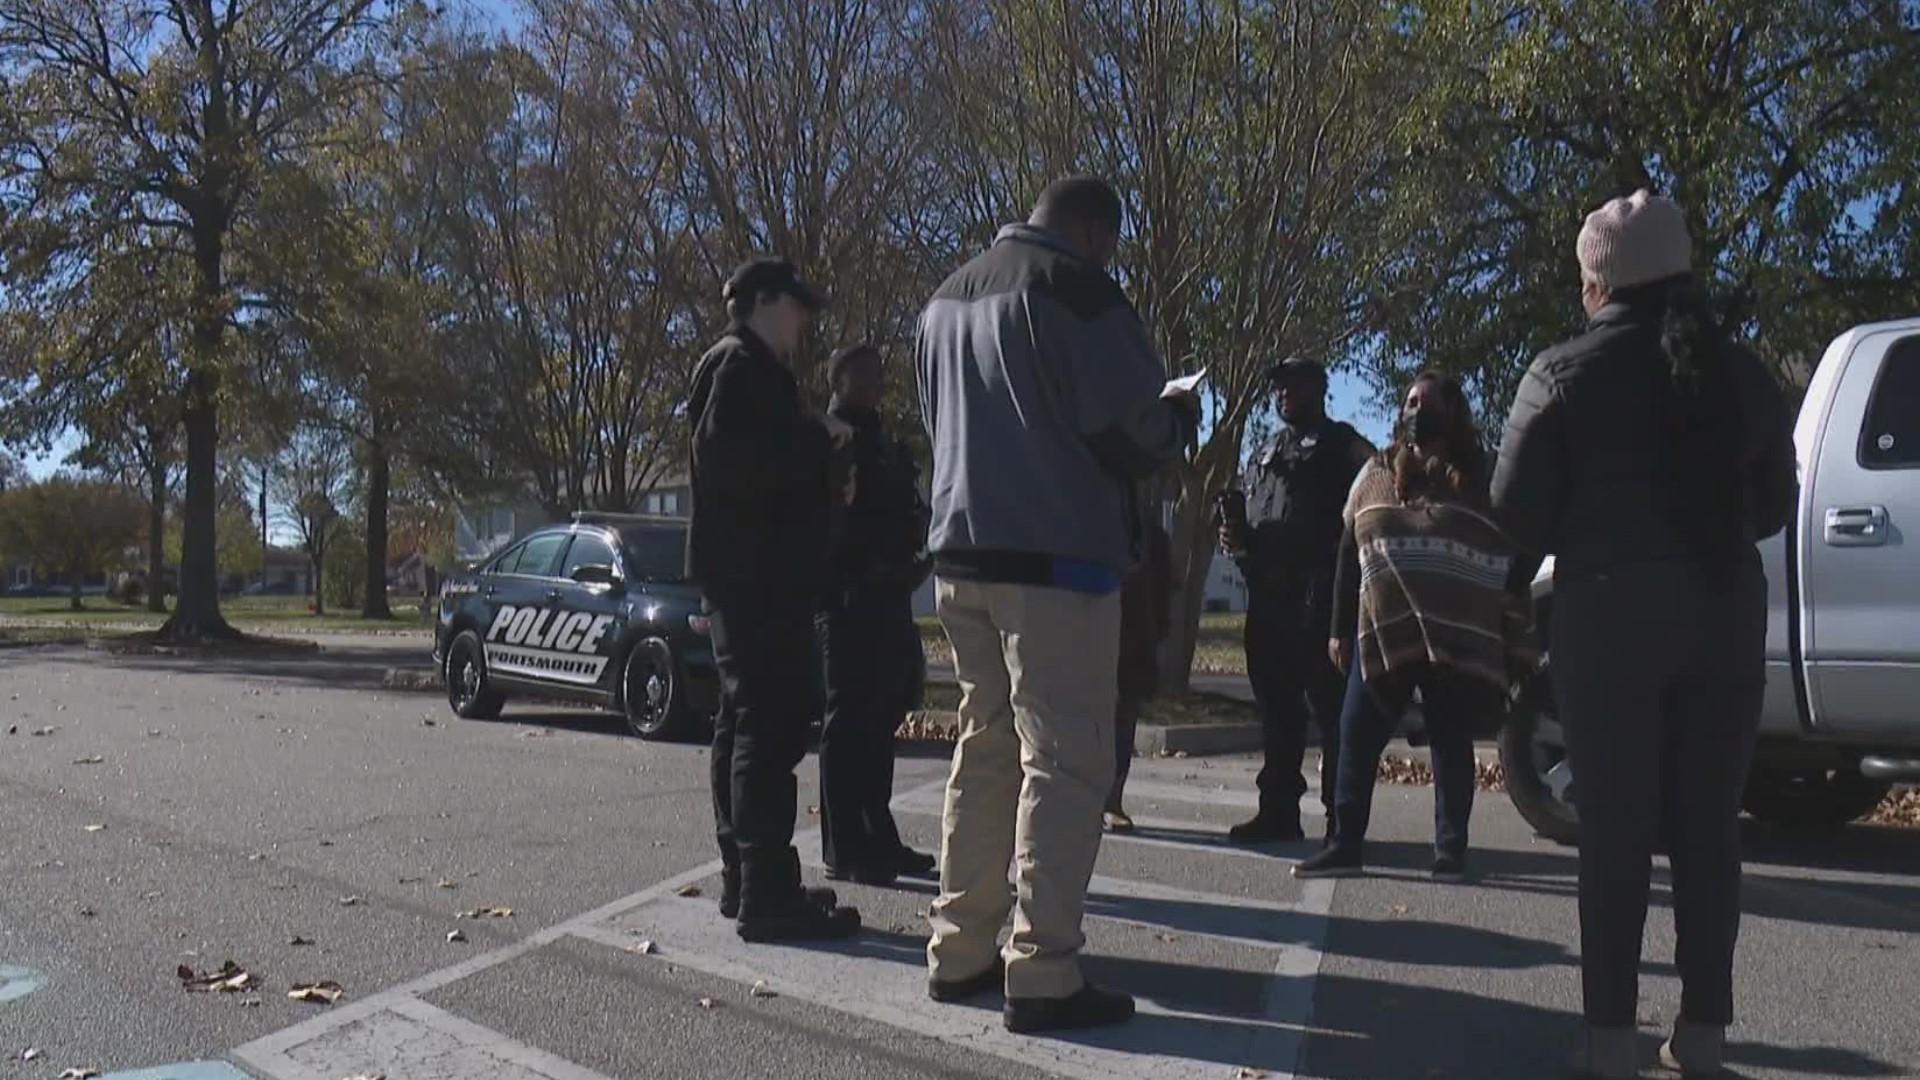 The Portsmouth Police Department partnered with local organizations to give out food for Thanksgiving.